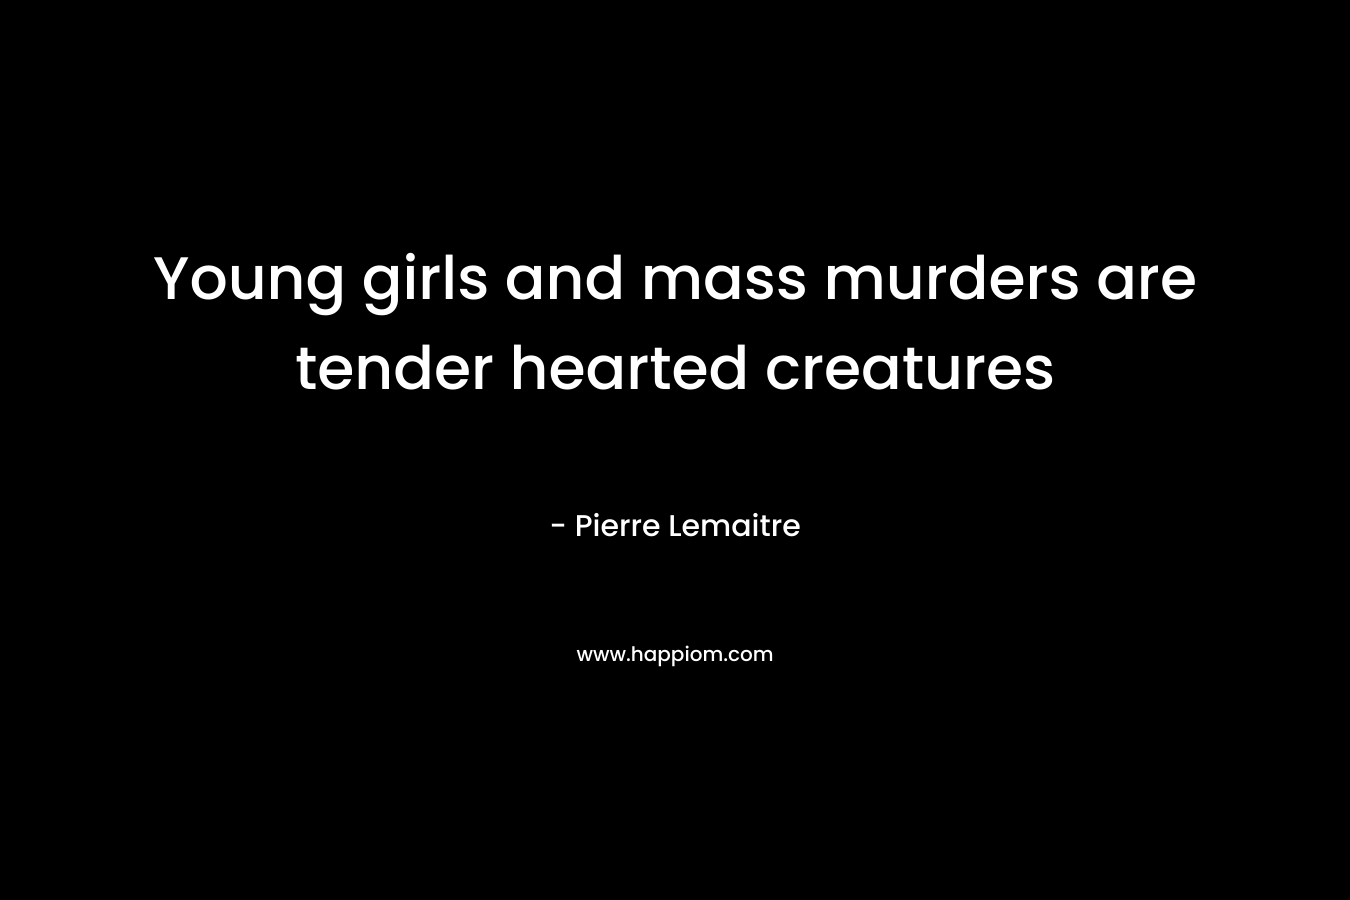 Young girls and mass murders are tender hearted creatures